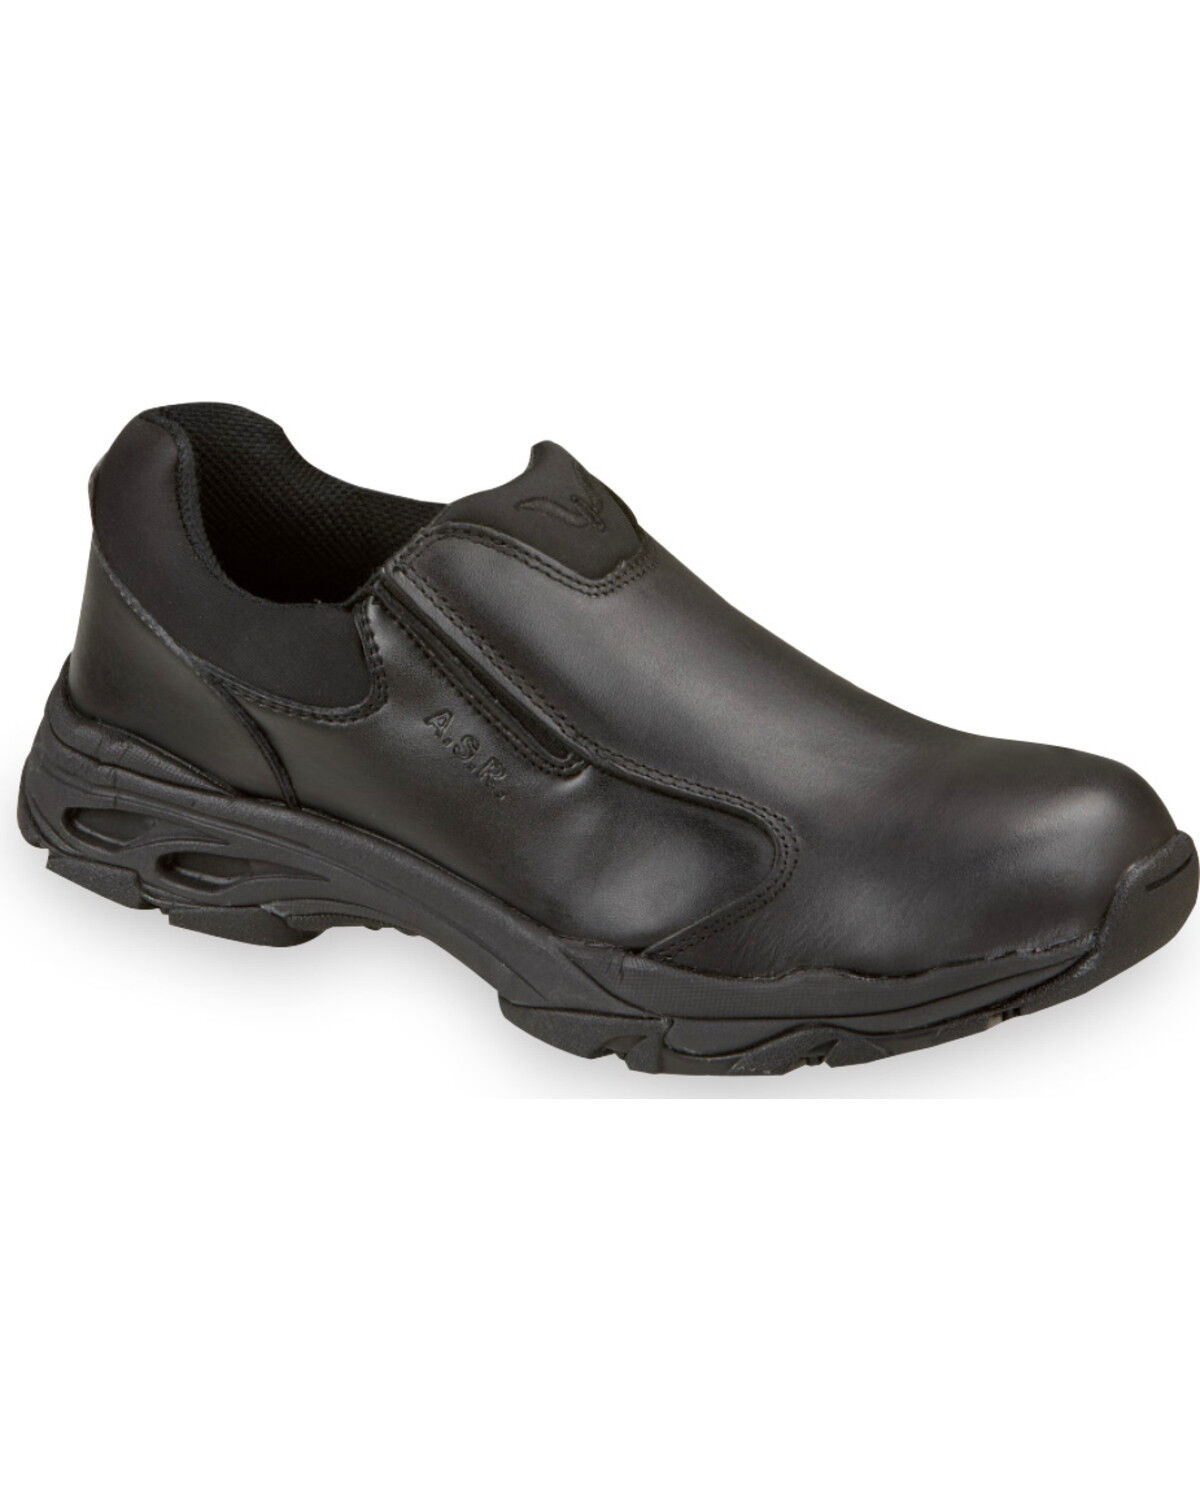 rubber work shoes